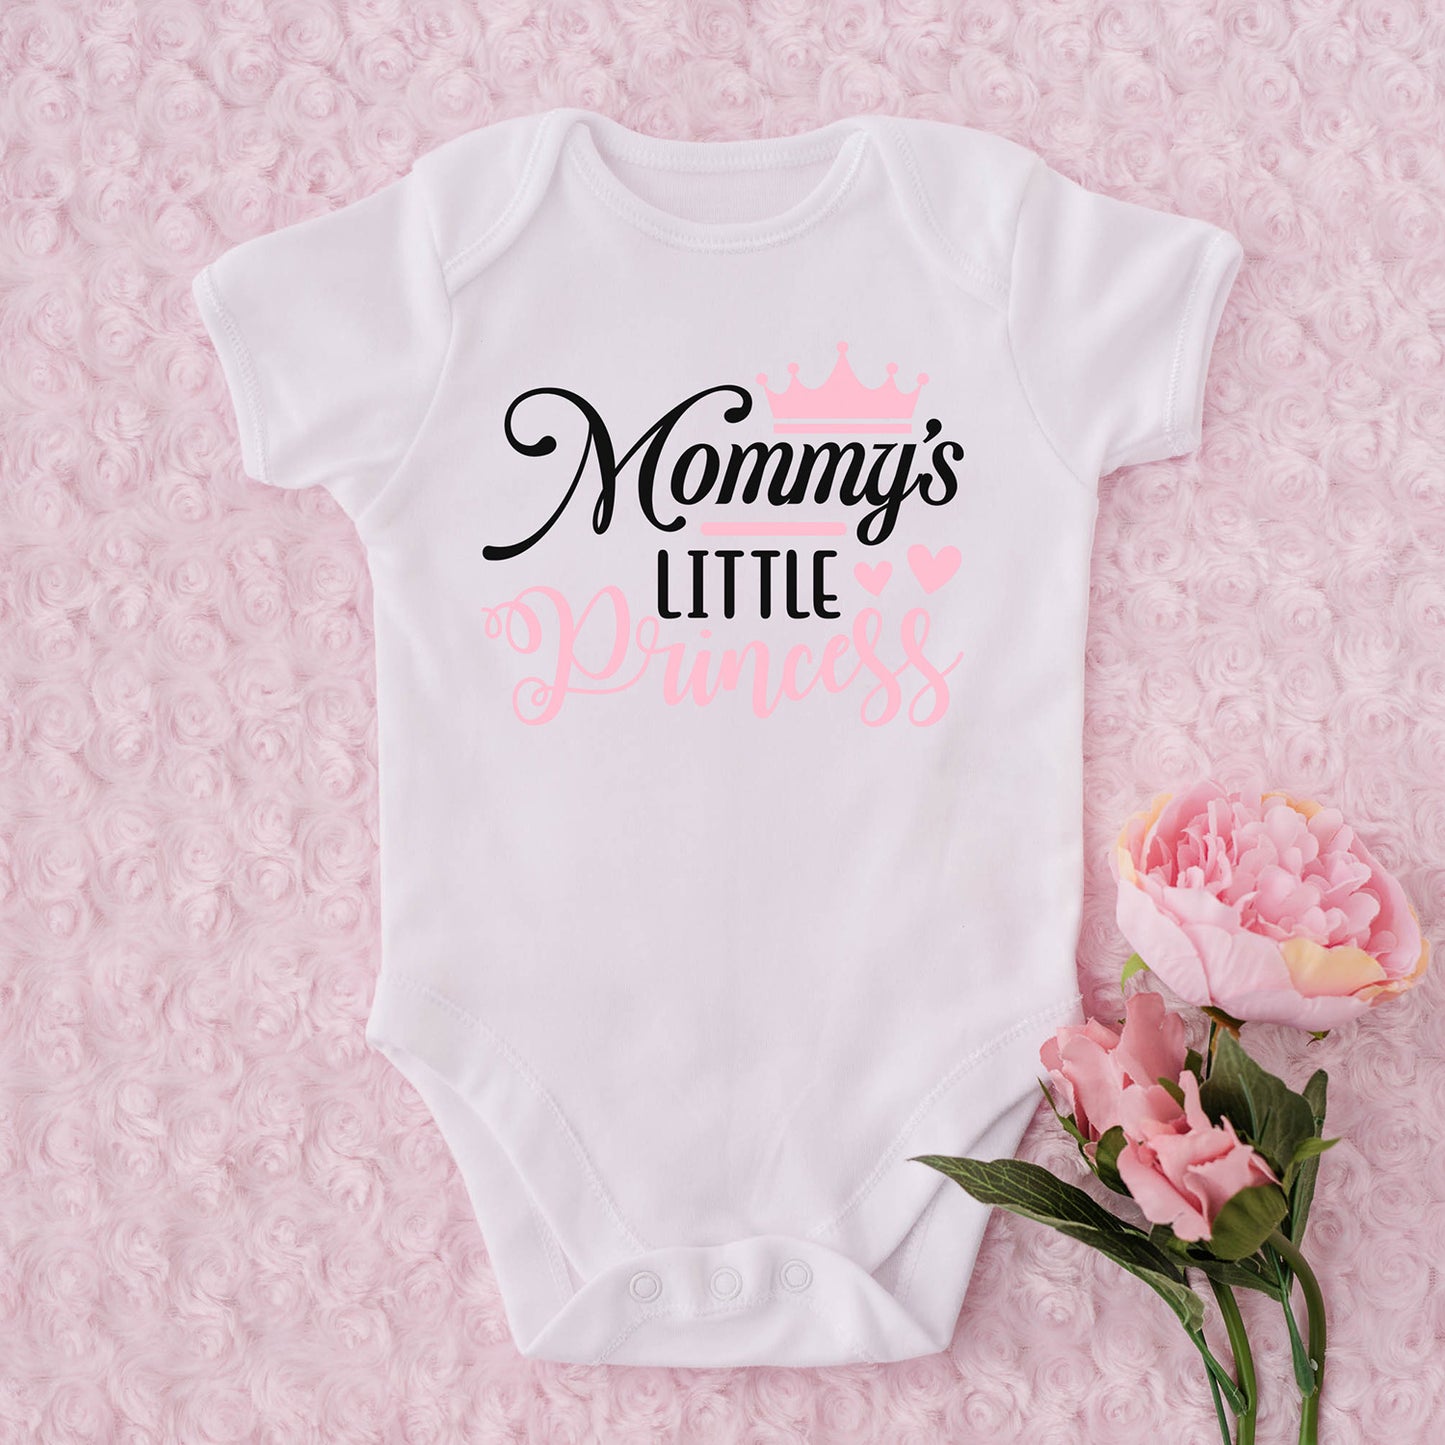 "Mommy's Little Princess" Graphic